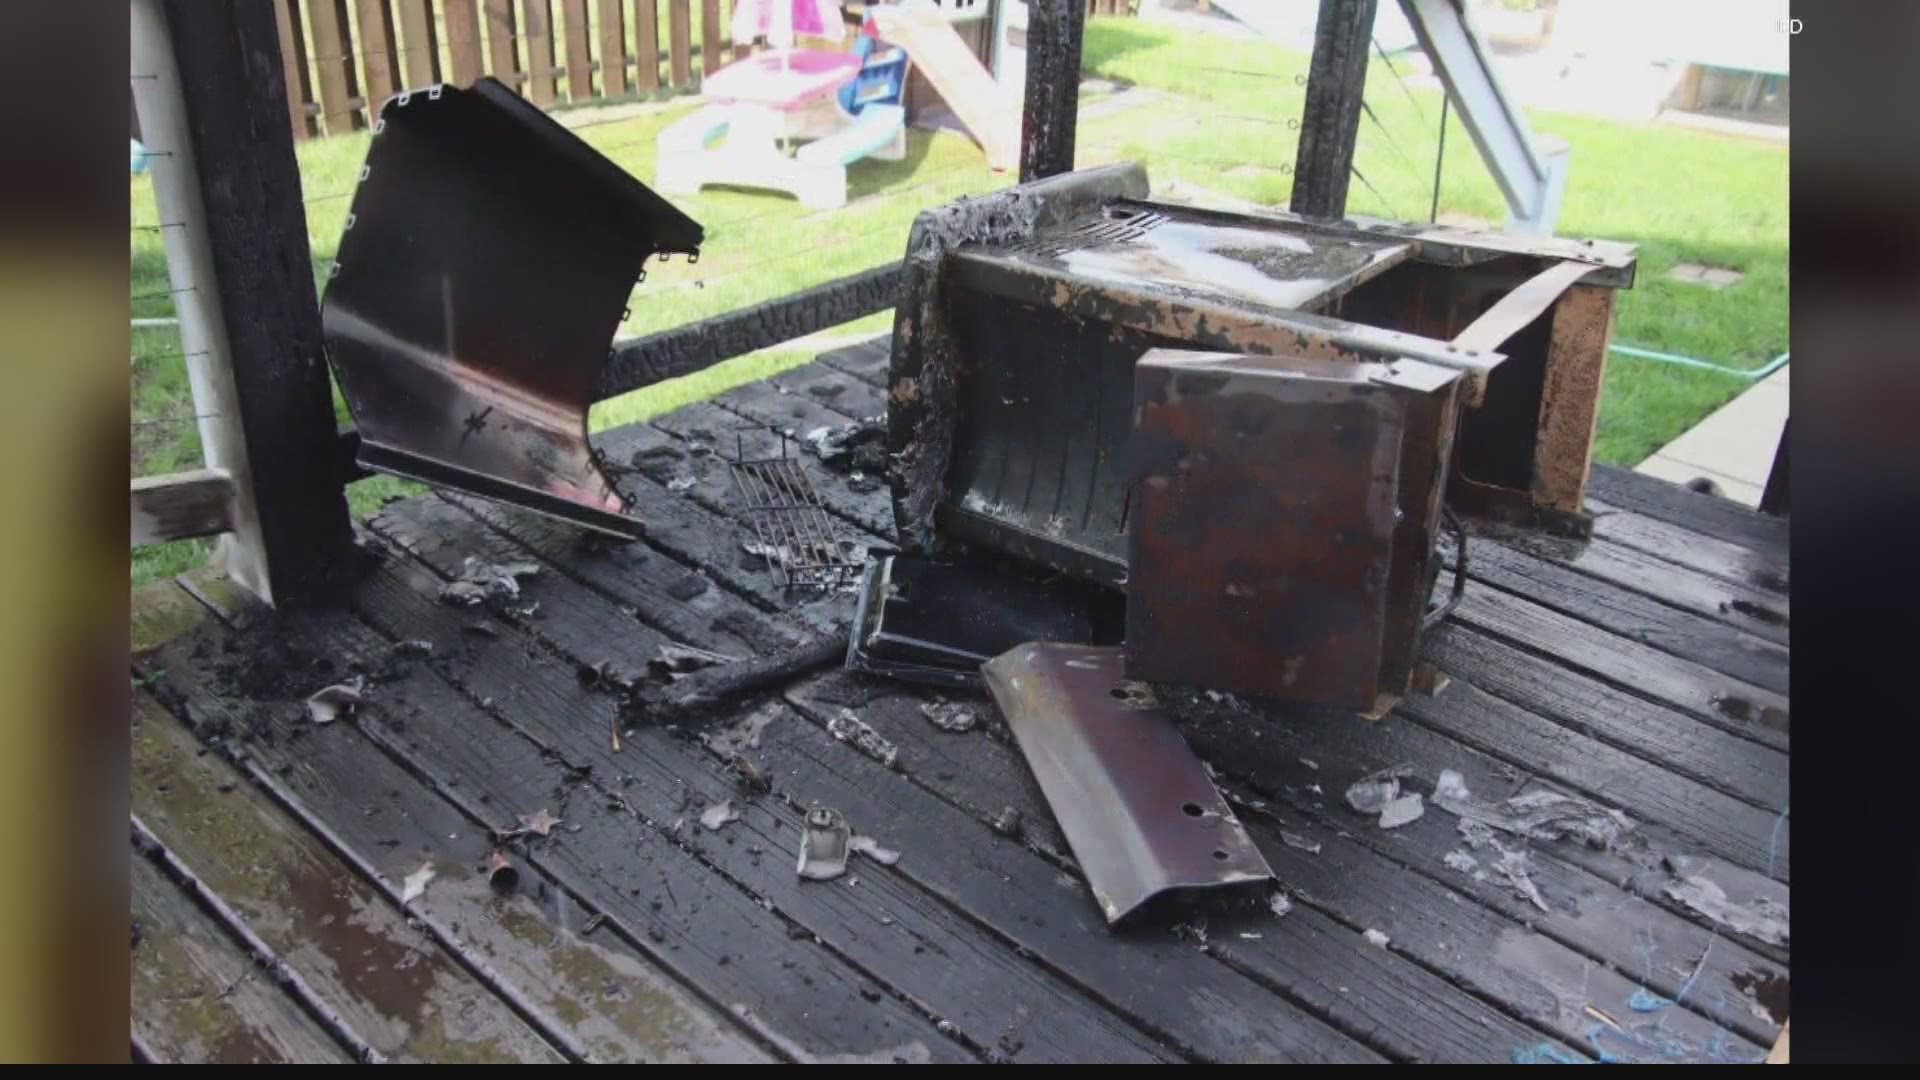 A man and his 7-month-old daughter escaped serious injury when a gas grill exploded into flames on his patio.